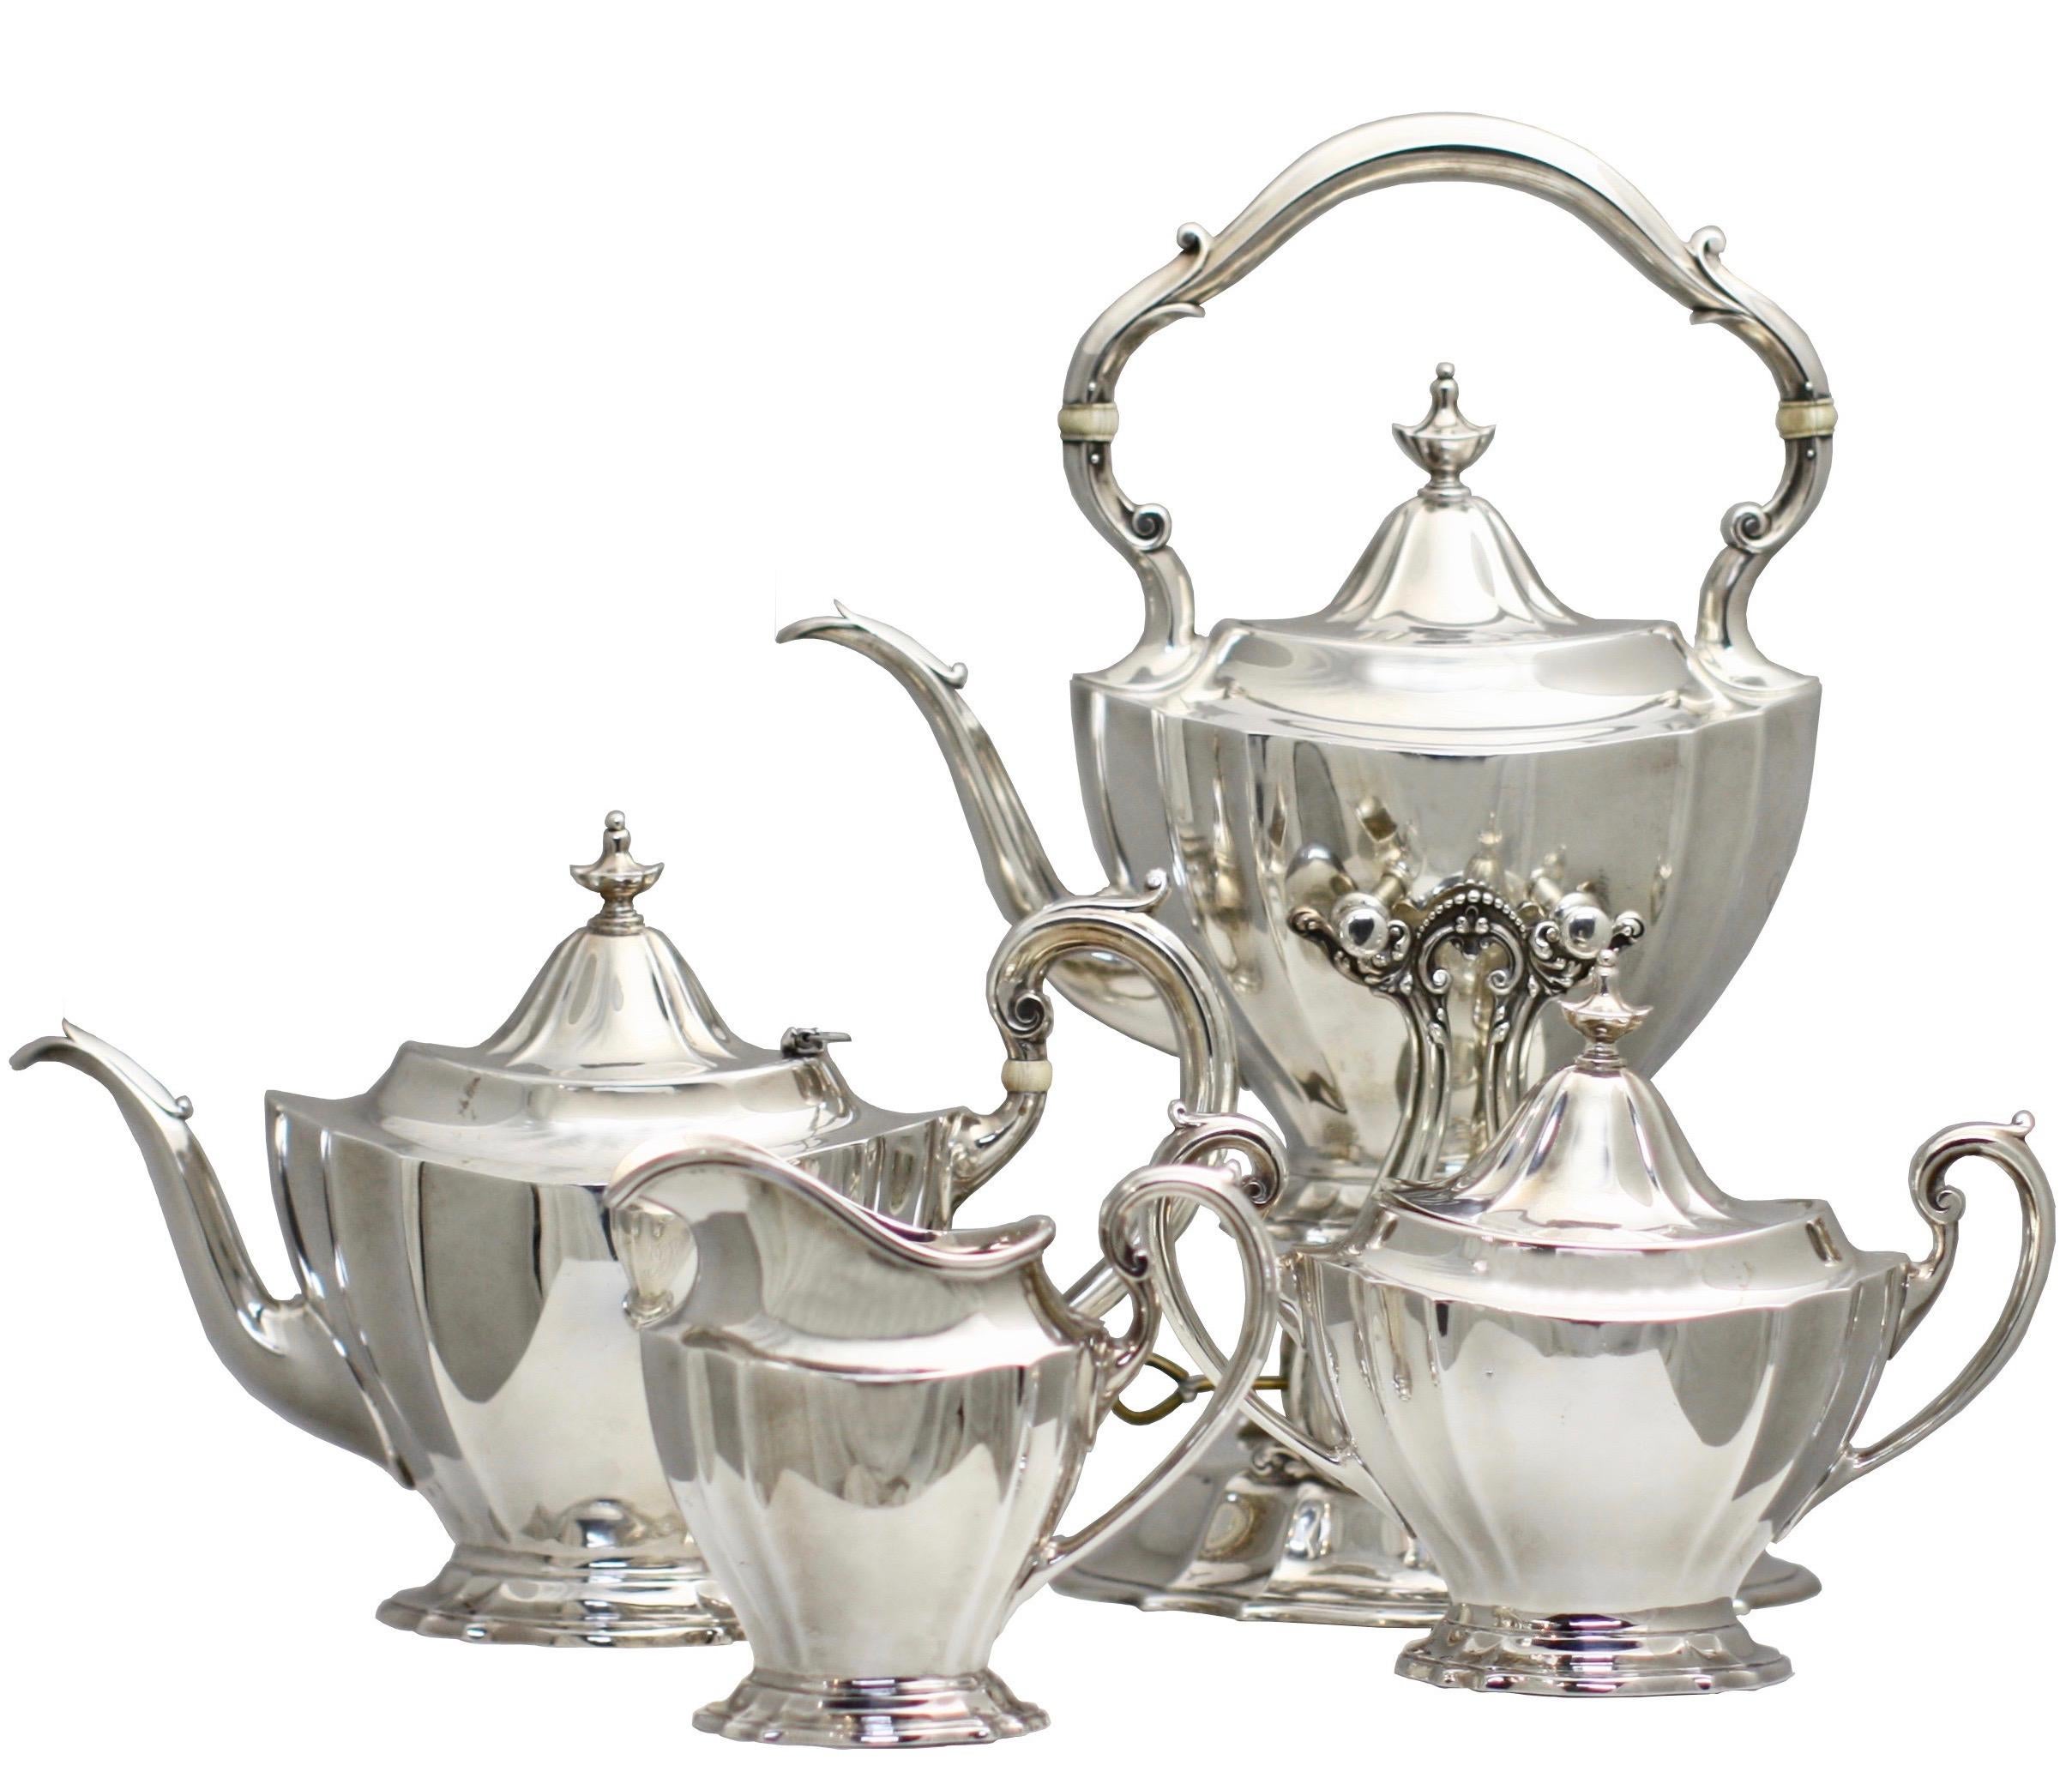 Reed And Barton Sterling Silver Four-Piece Tea And Coffee Service with a Tiffany & Co. Silver Plated Tray
1928, marked with Reed and Barton eagle symbols, Sterling, 650.b, the tray marked Tiffany & Co., 
Each piece of urn shape with loop handles,